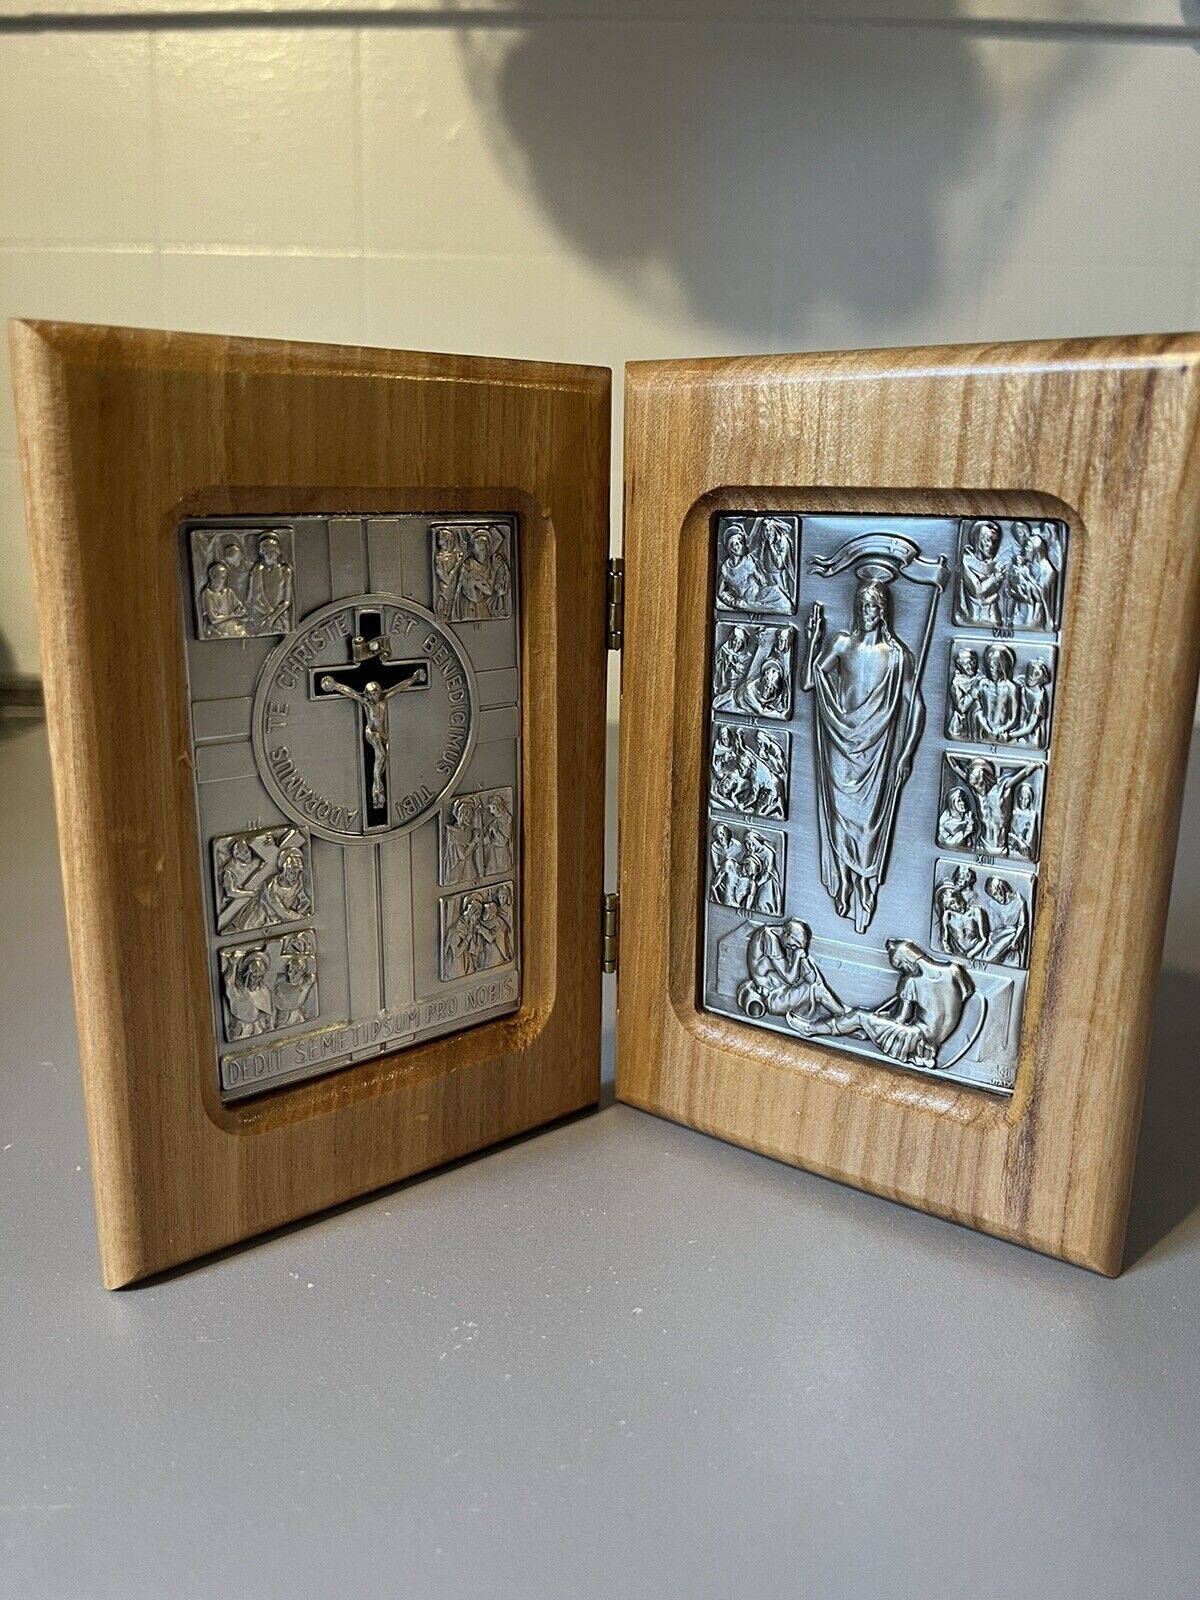 Italian Handcrafted Metal & Wood Pocket Shrine Stations Of The Cross 